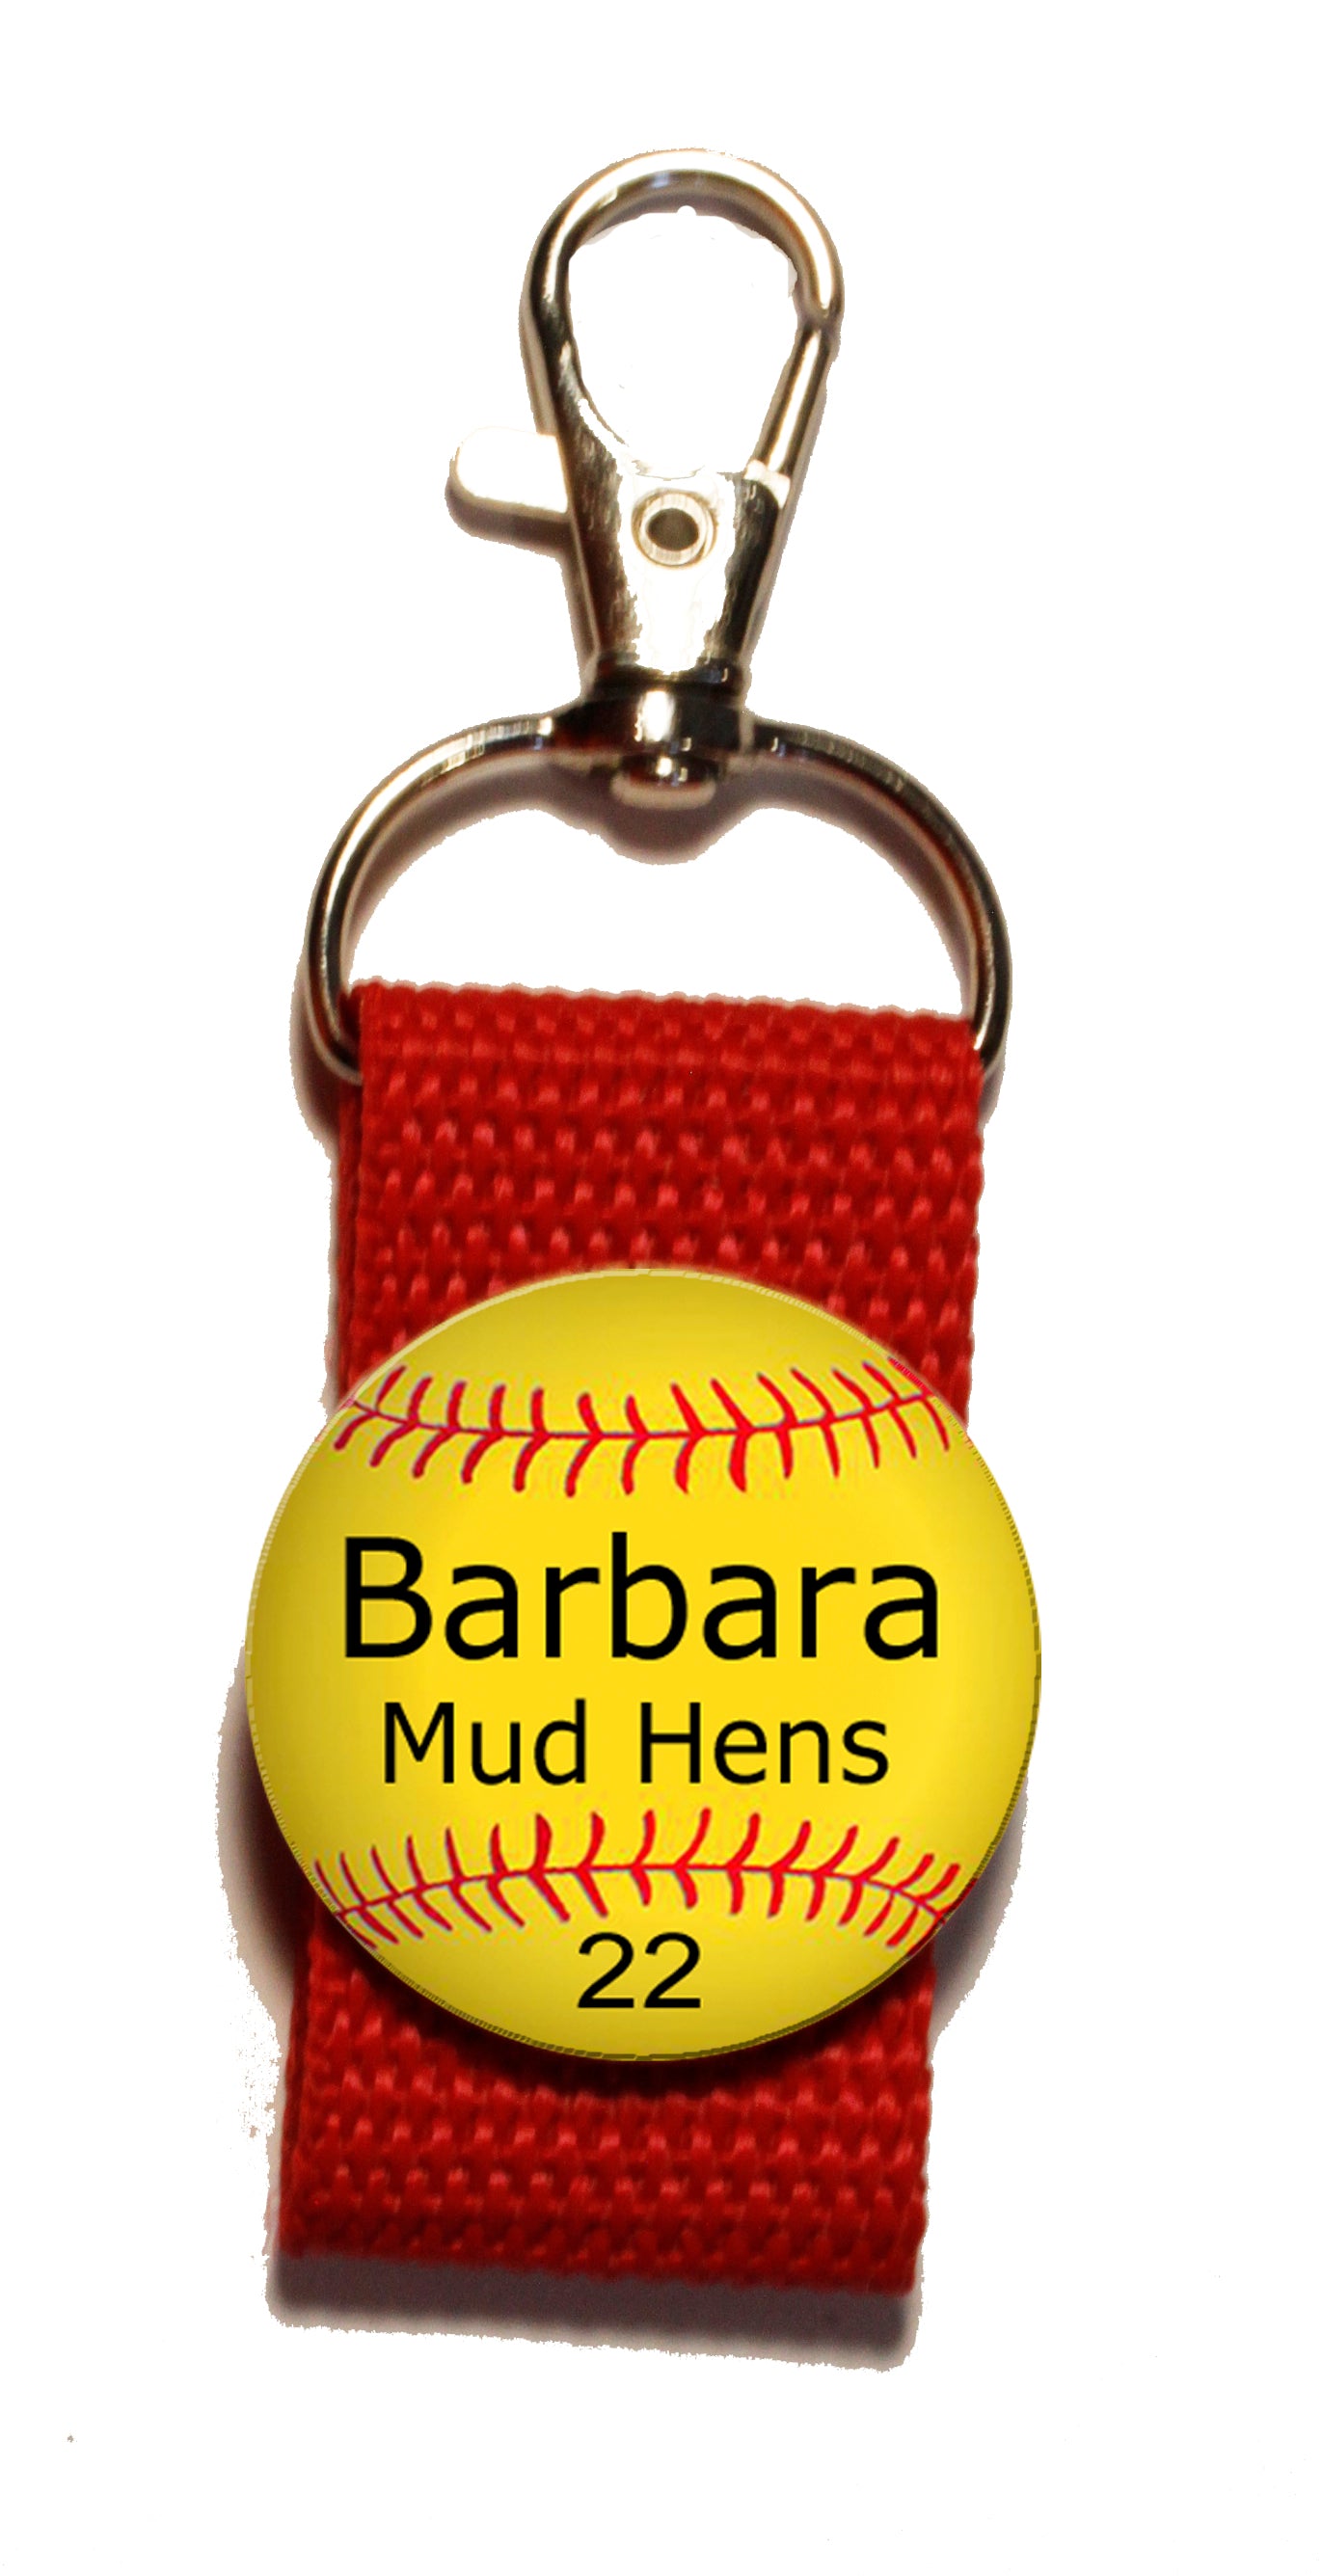 Softball Strap Zipper Pull Personalized with Name, Team Name, and Number